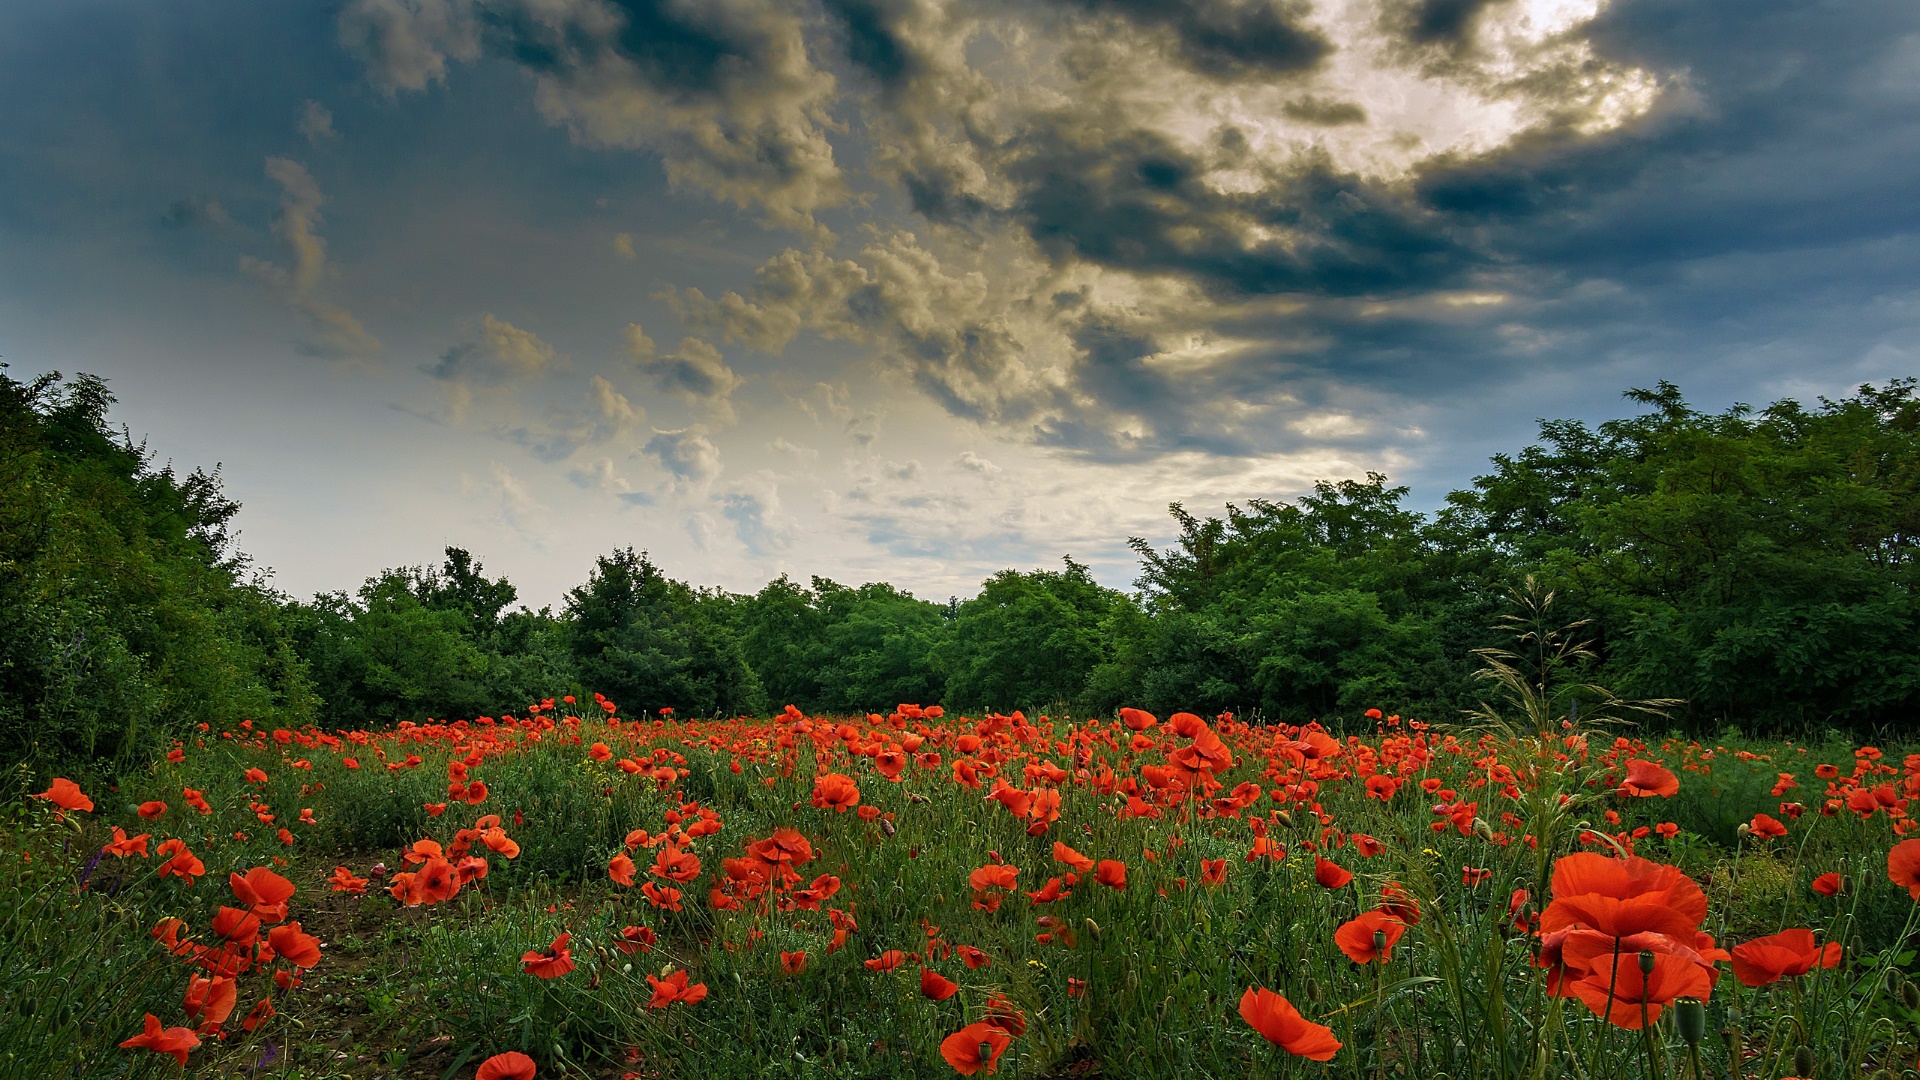 General 1920x1080 sky flowers field red green blue nature clouds red flowers poppies